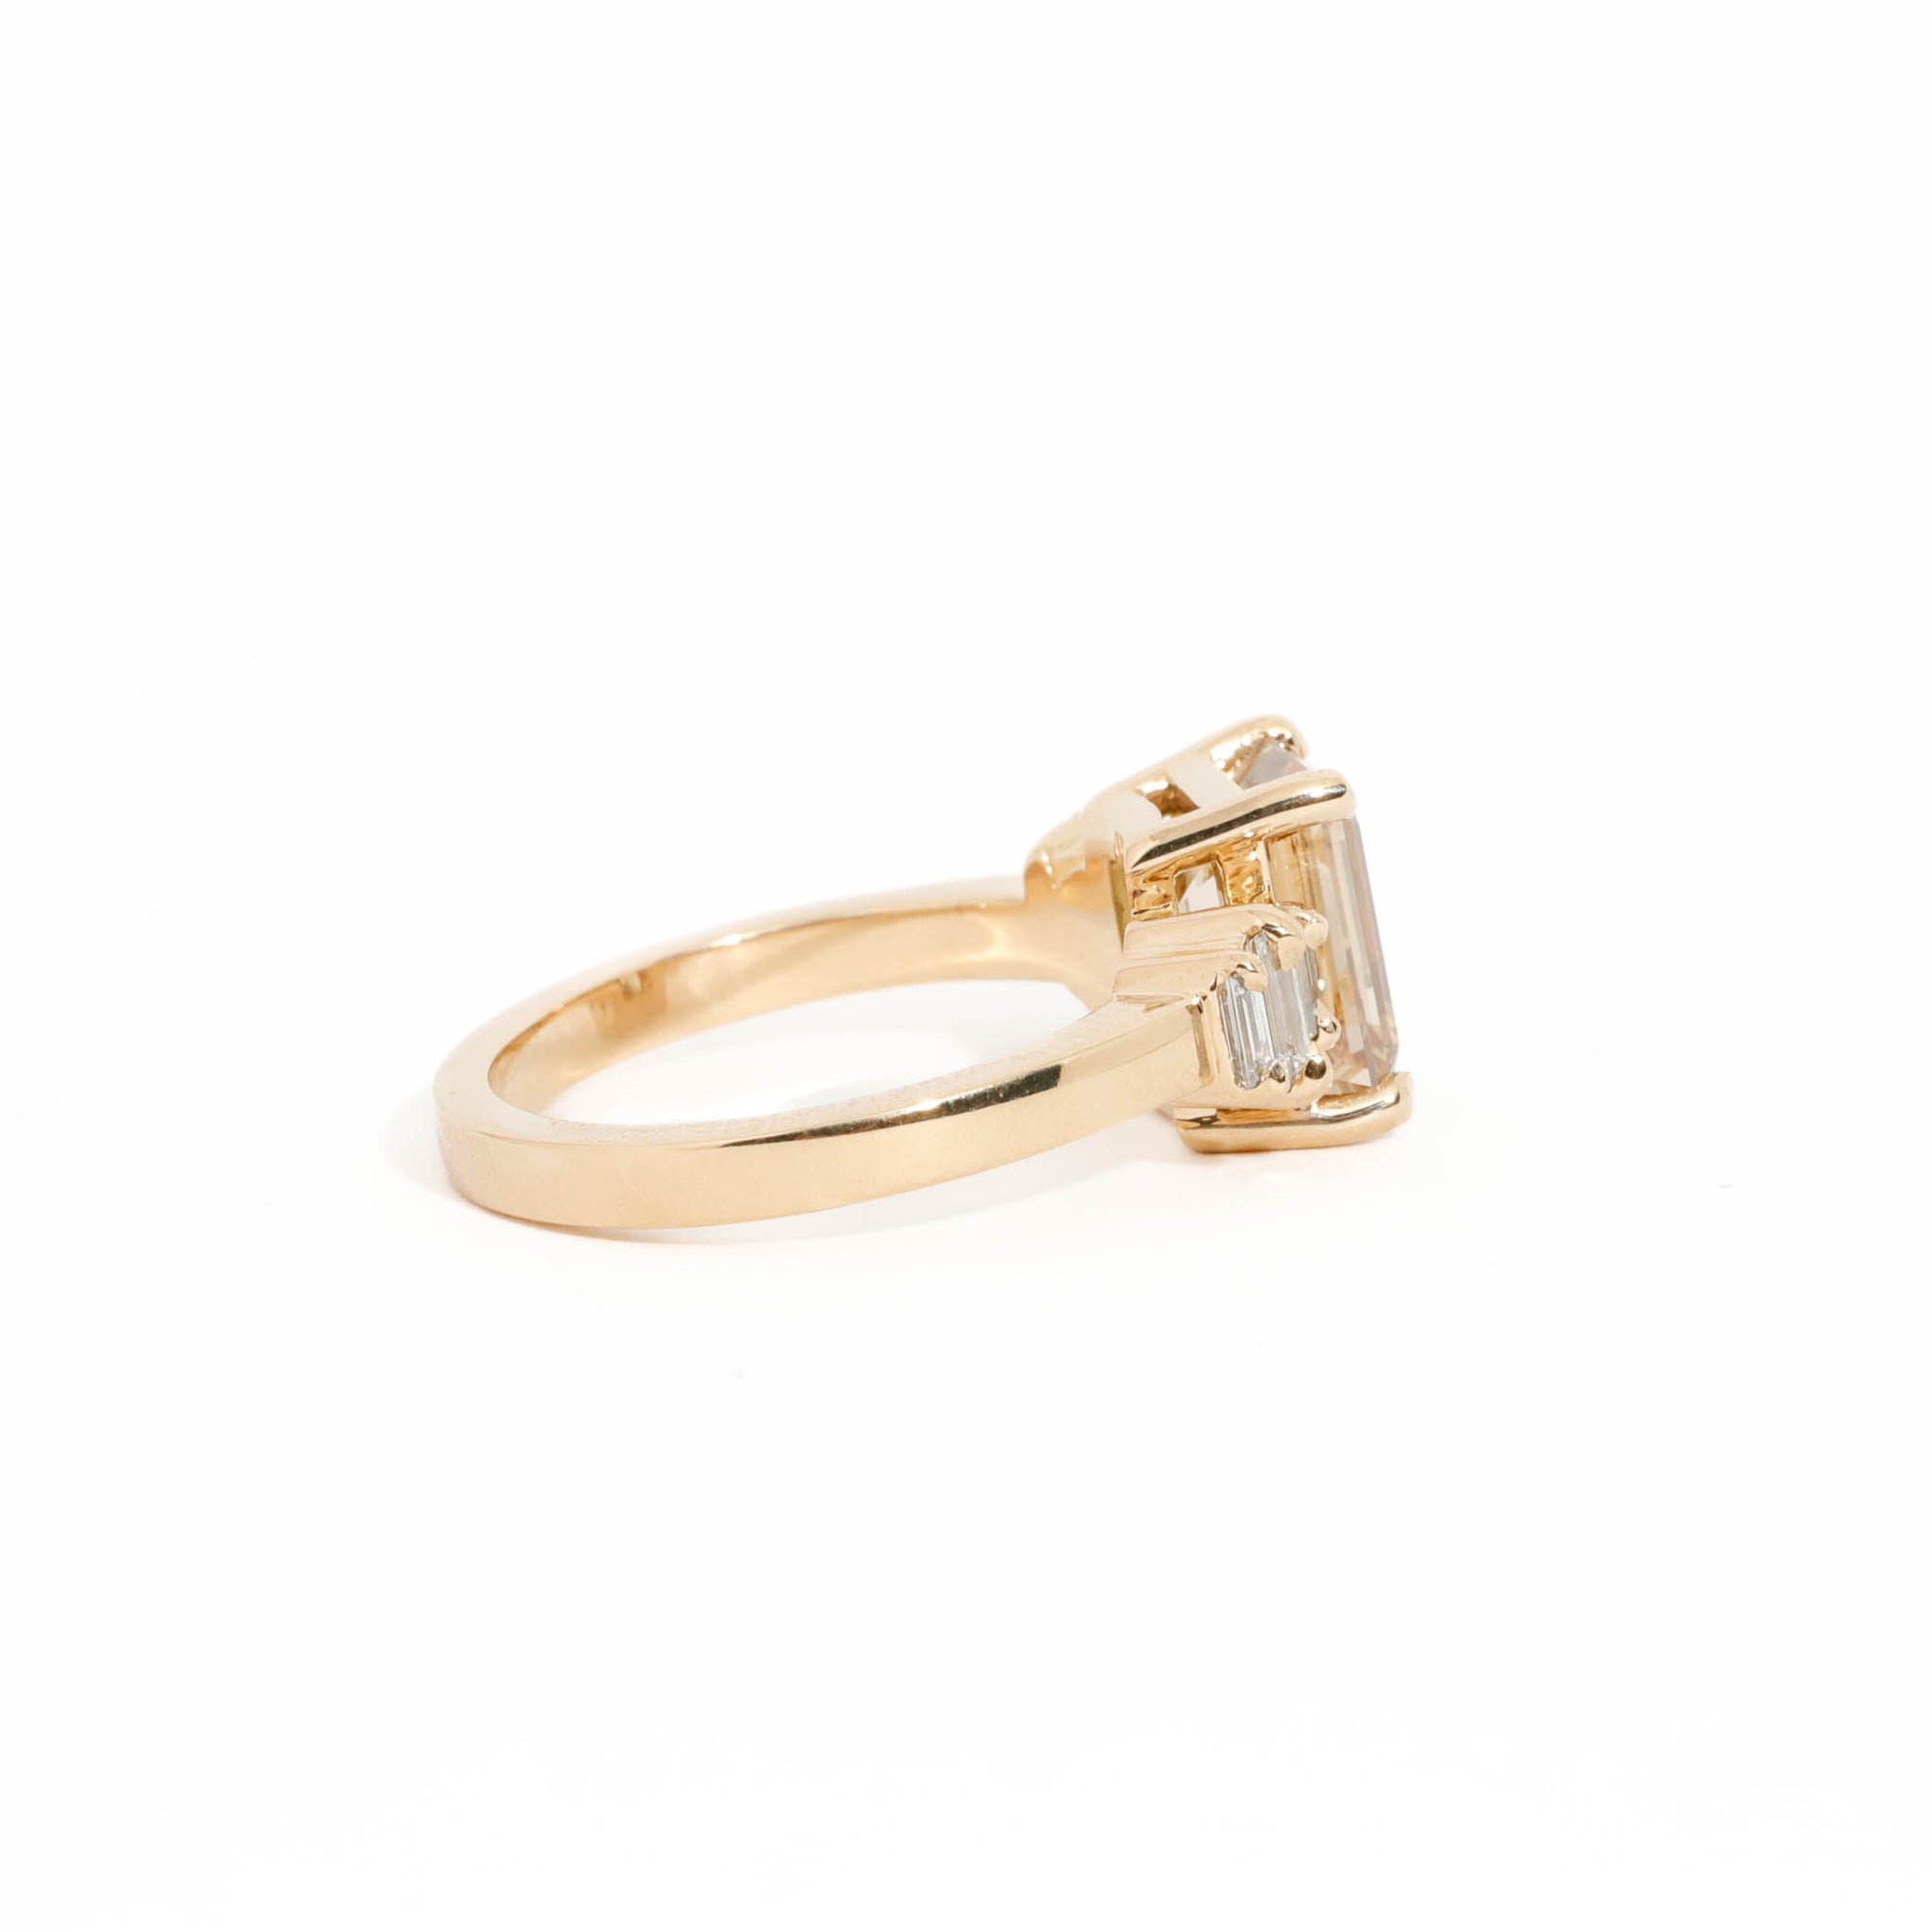 Emerald Cut Champagne Diamond Ring with a Diamond Band in 18 Carat Yellow Gold